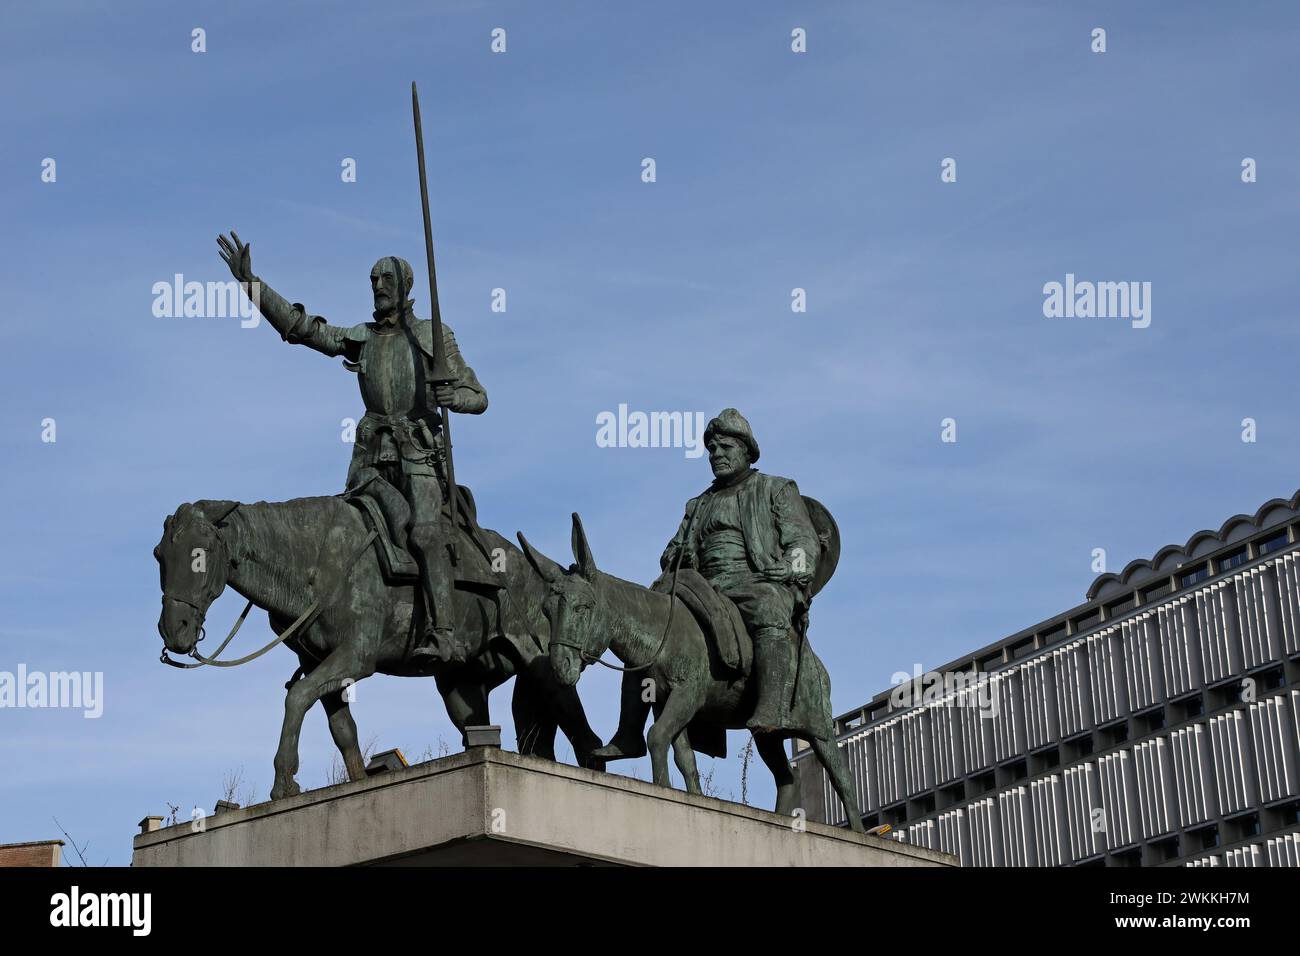 Equestrian statue of Don Quixote and Sancho Panza in Brussels Stock Photo